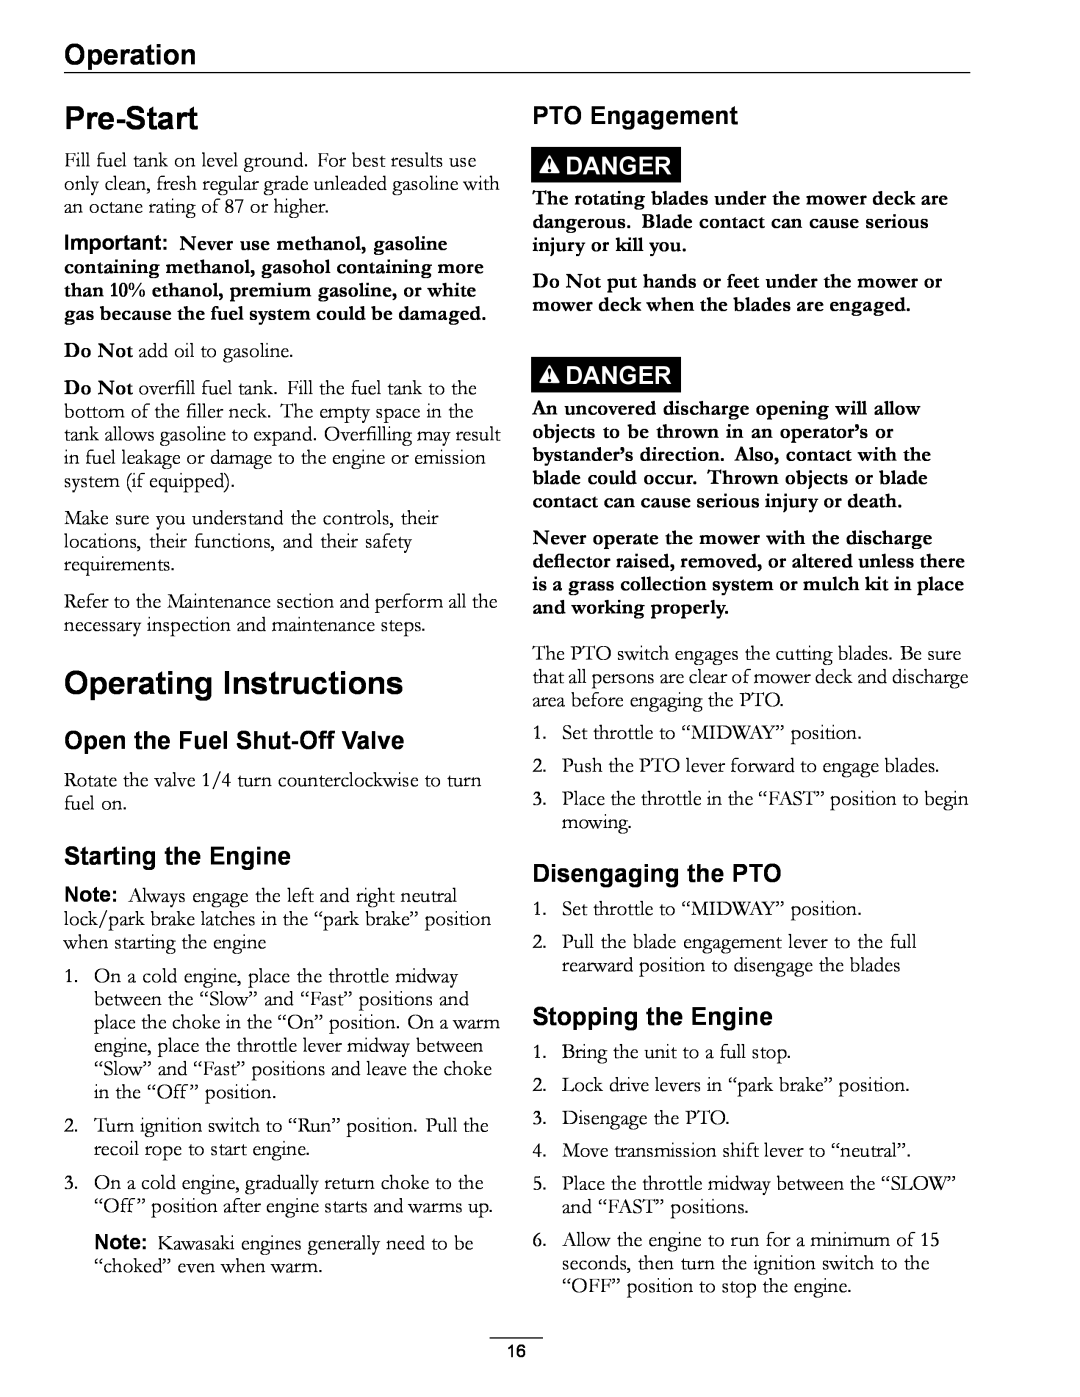 Exmark 850 Pre-Start, Operating Instructions, Open the Fuel Shut-OffValve, Starting the Engine, PTO Engagement, Operation 